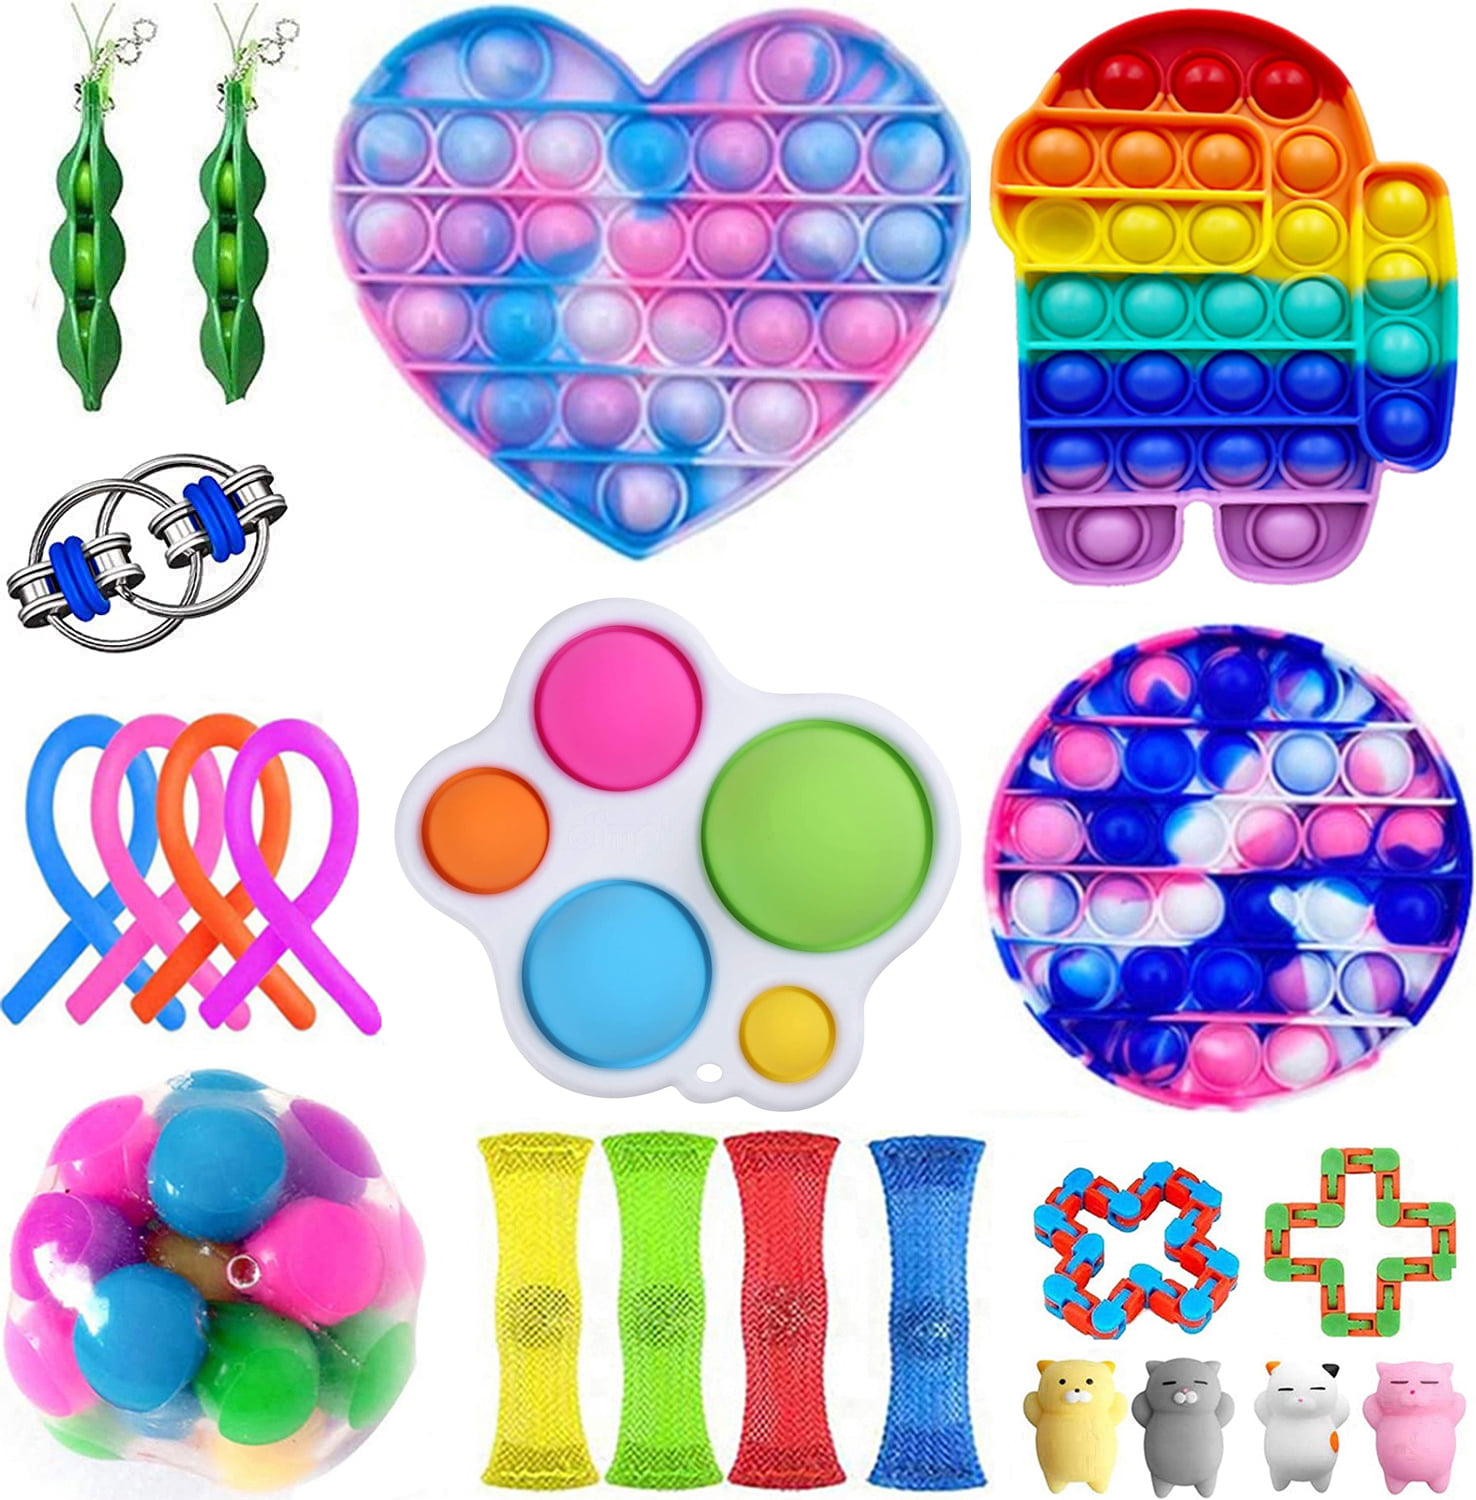 Details about   6× Sensory Simple Dimple Figet Toy Set Bundle Stress Relief Hand  Kid Adult Game 